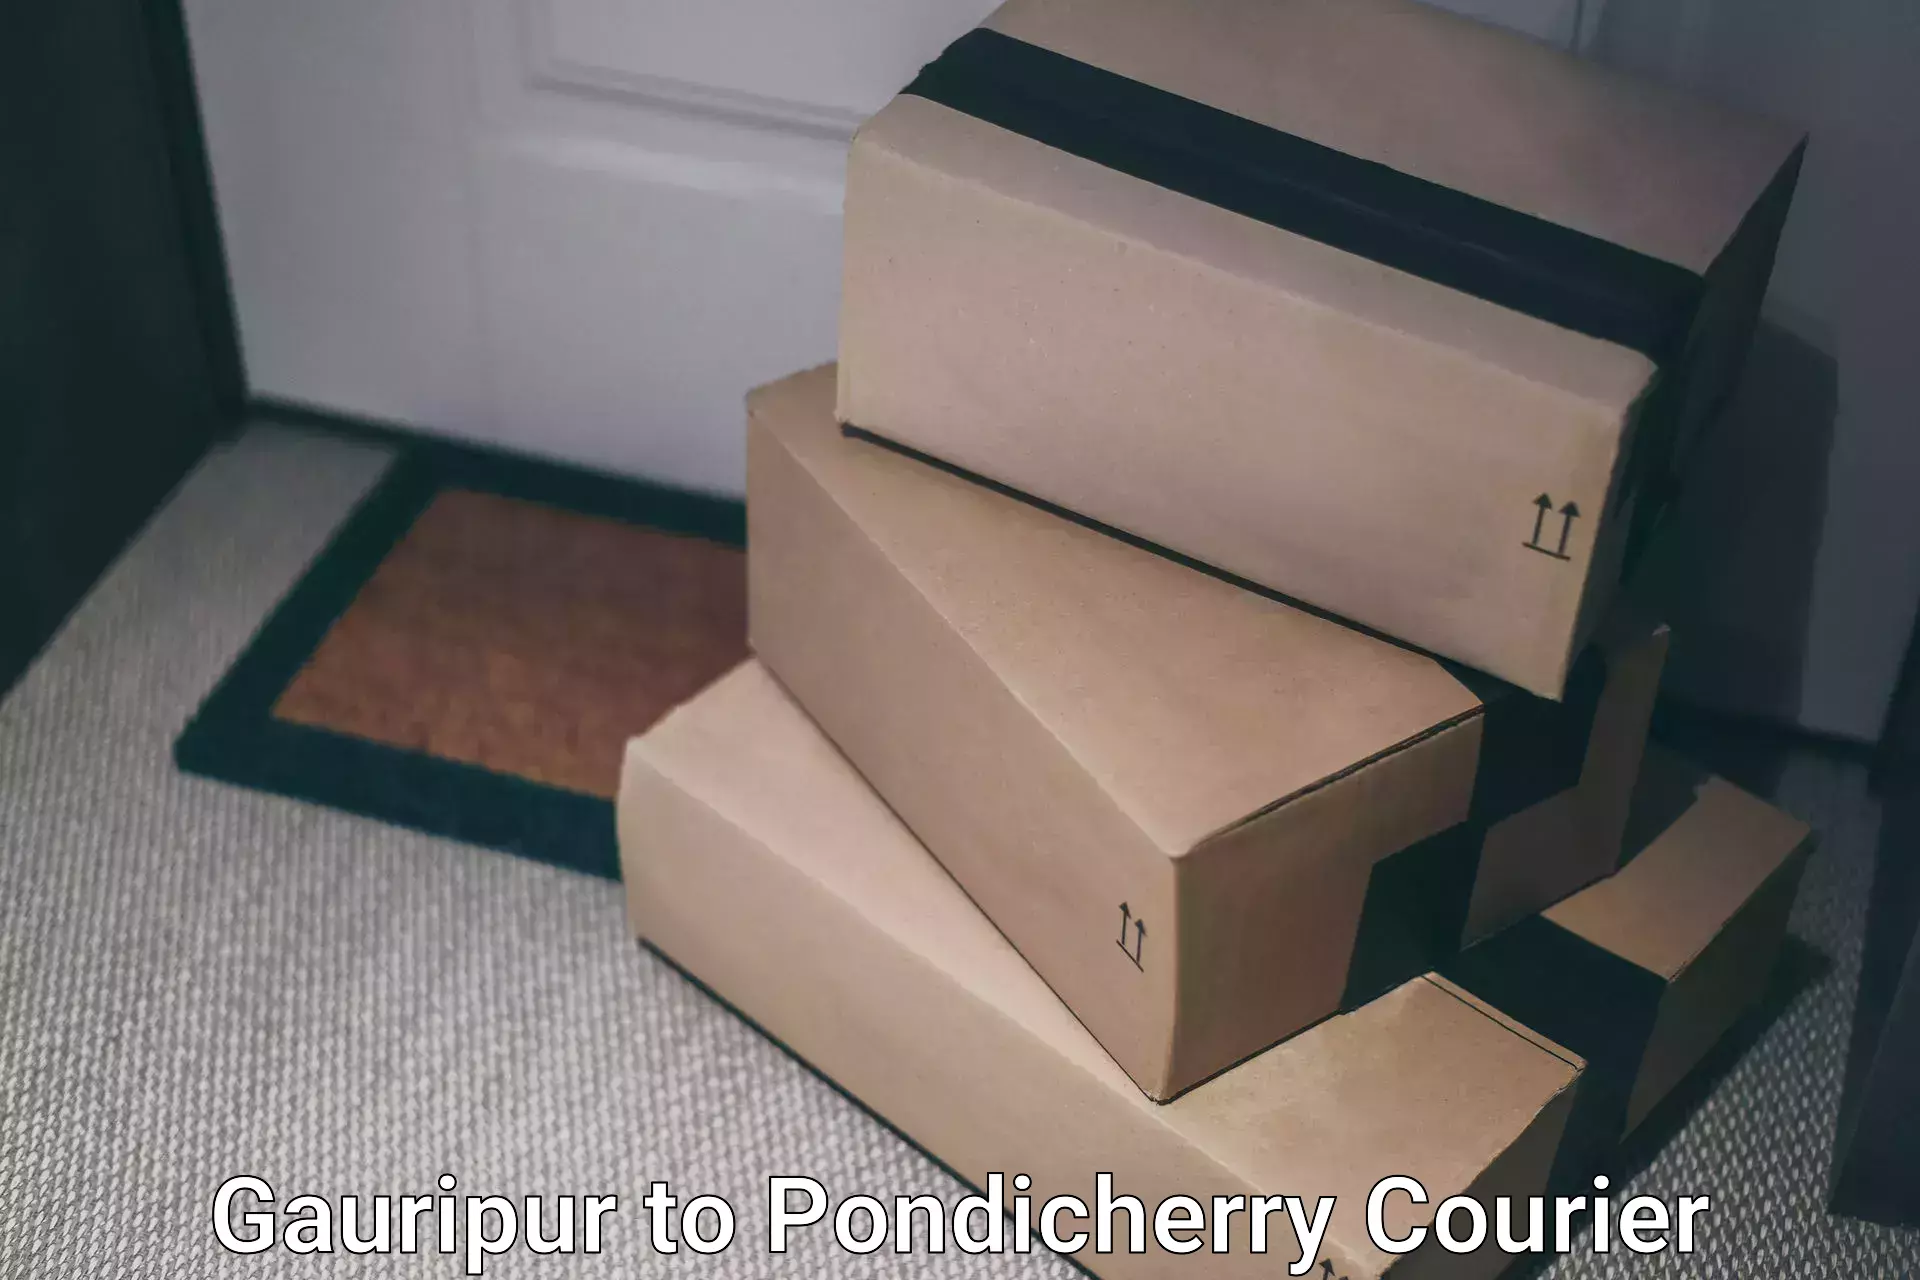 Supply chain delivery Gauripur to Pondicherry